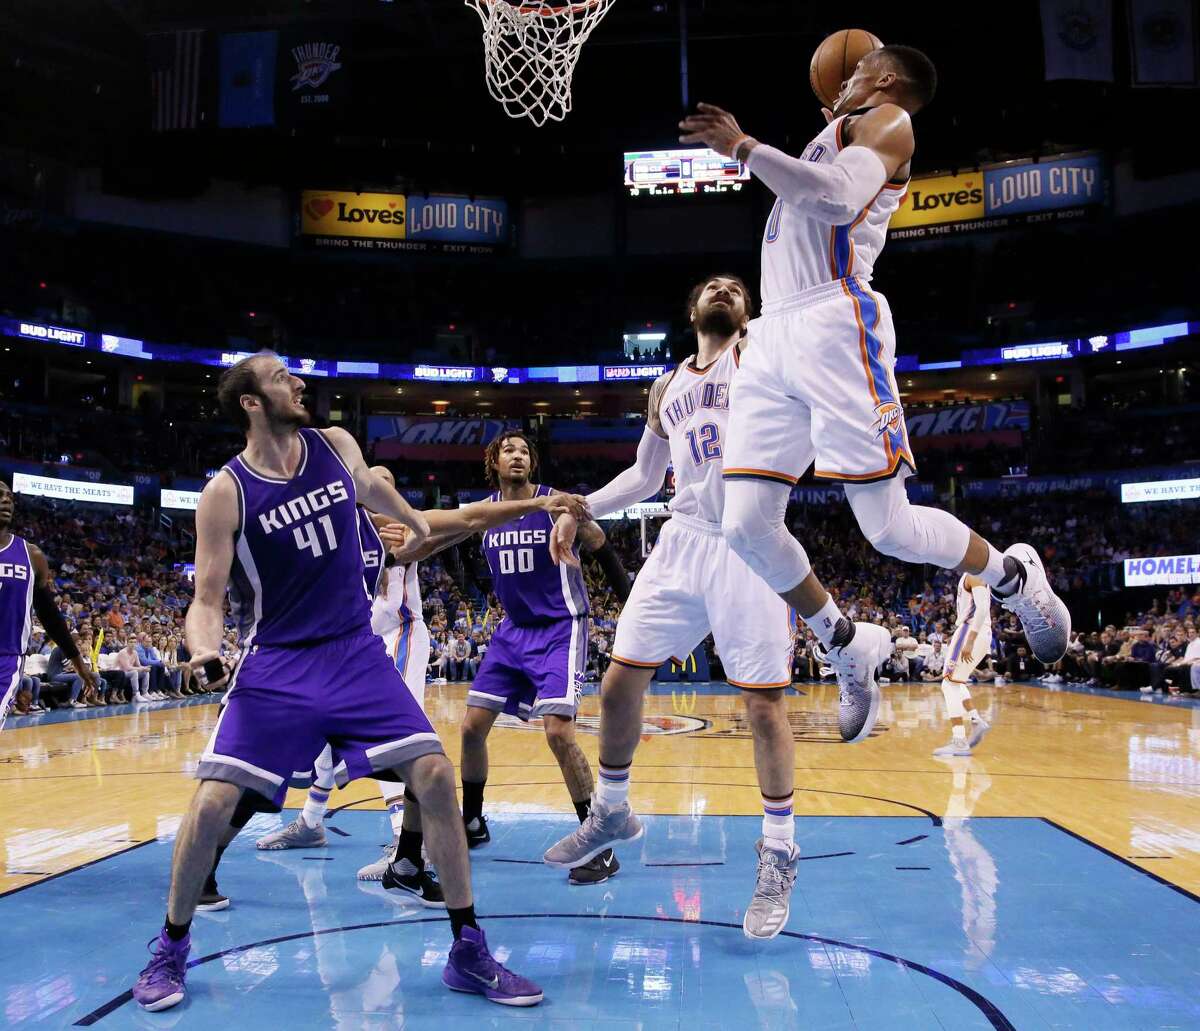 Oklahoma City guard Russell Westbrook, right, had 28 points, eight rebounds and 10 assists to help lead the Thunder to their fifth straight victory.